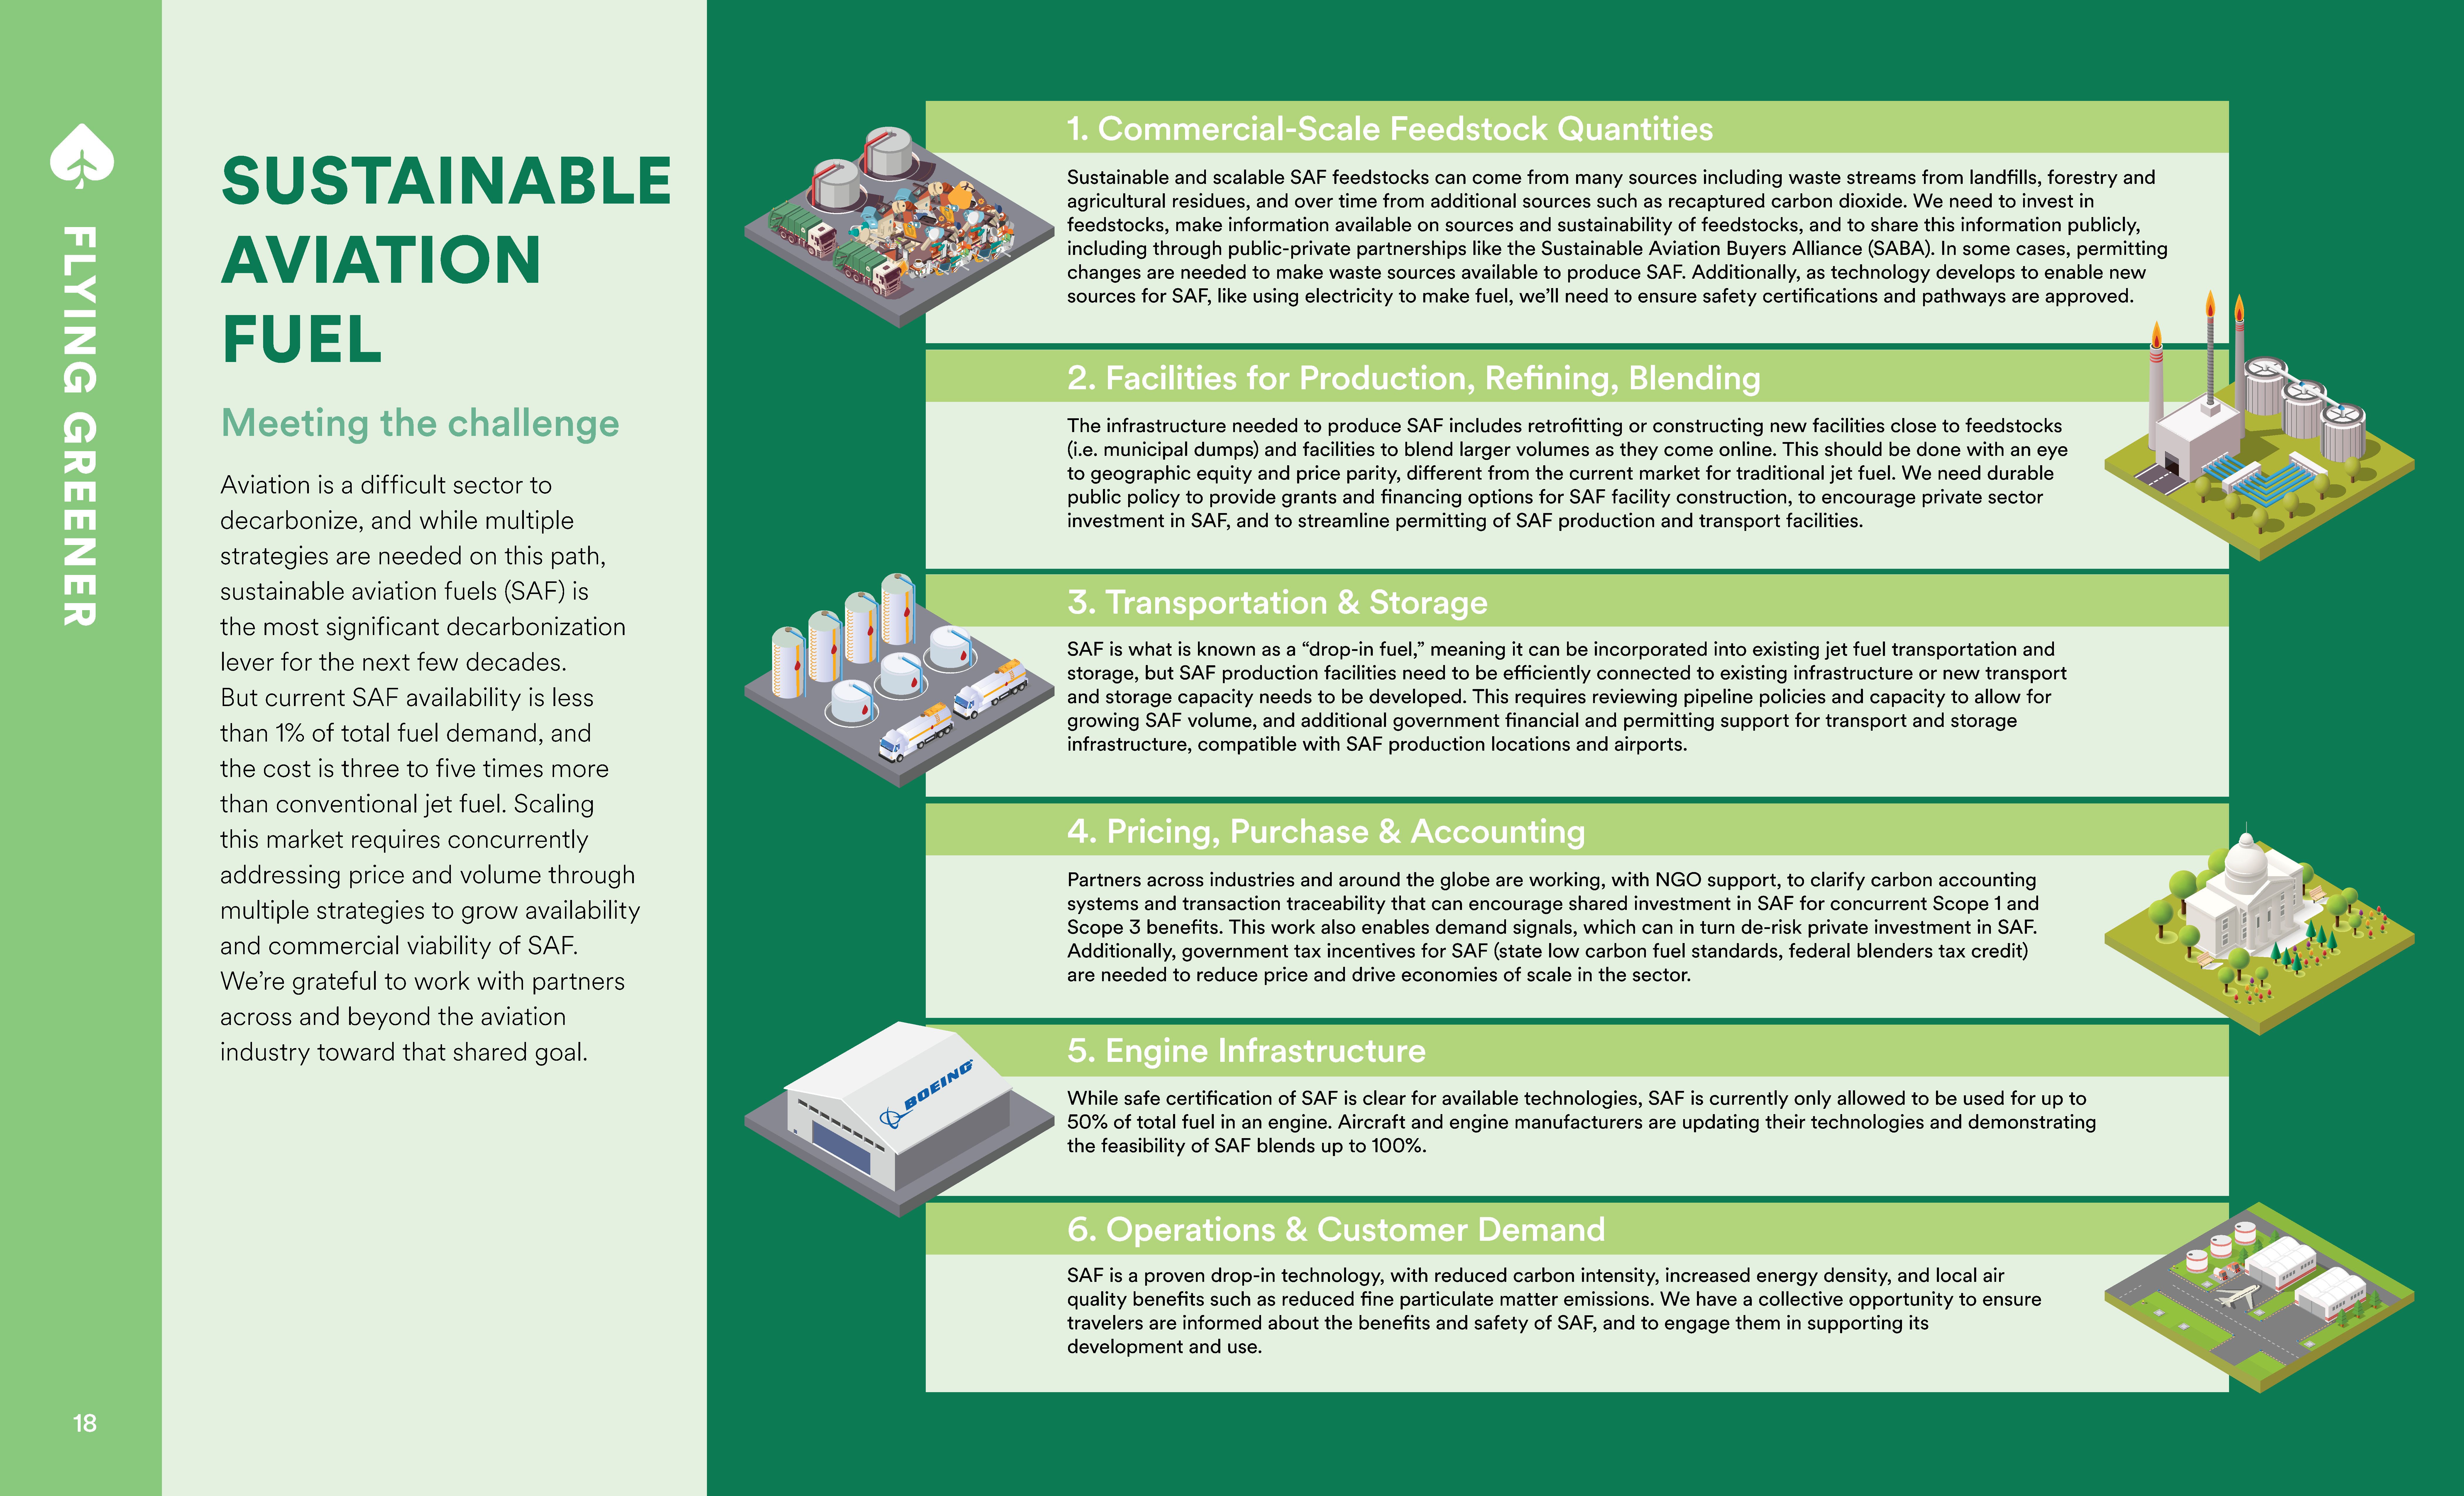 Page 18 of the Alaska Airlines Sustainability Report Regarding Sustainable Aviation Fuel